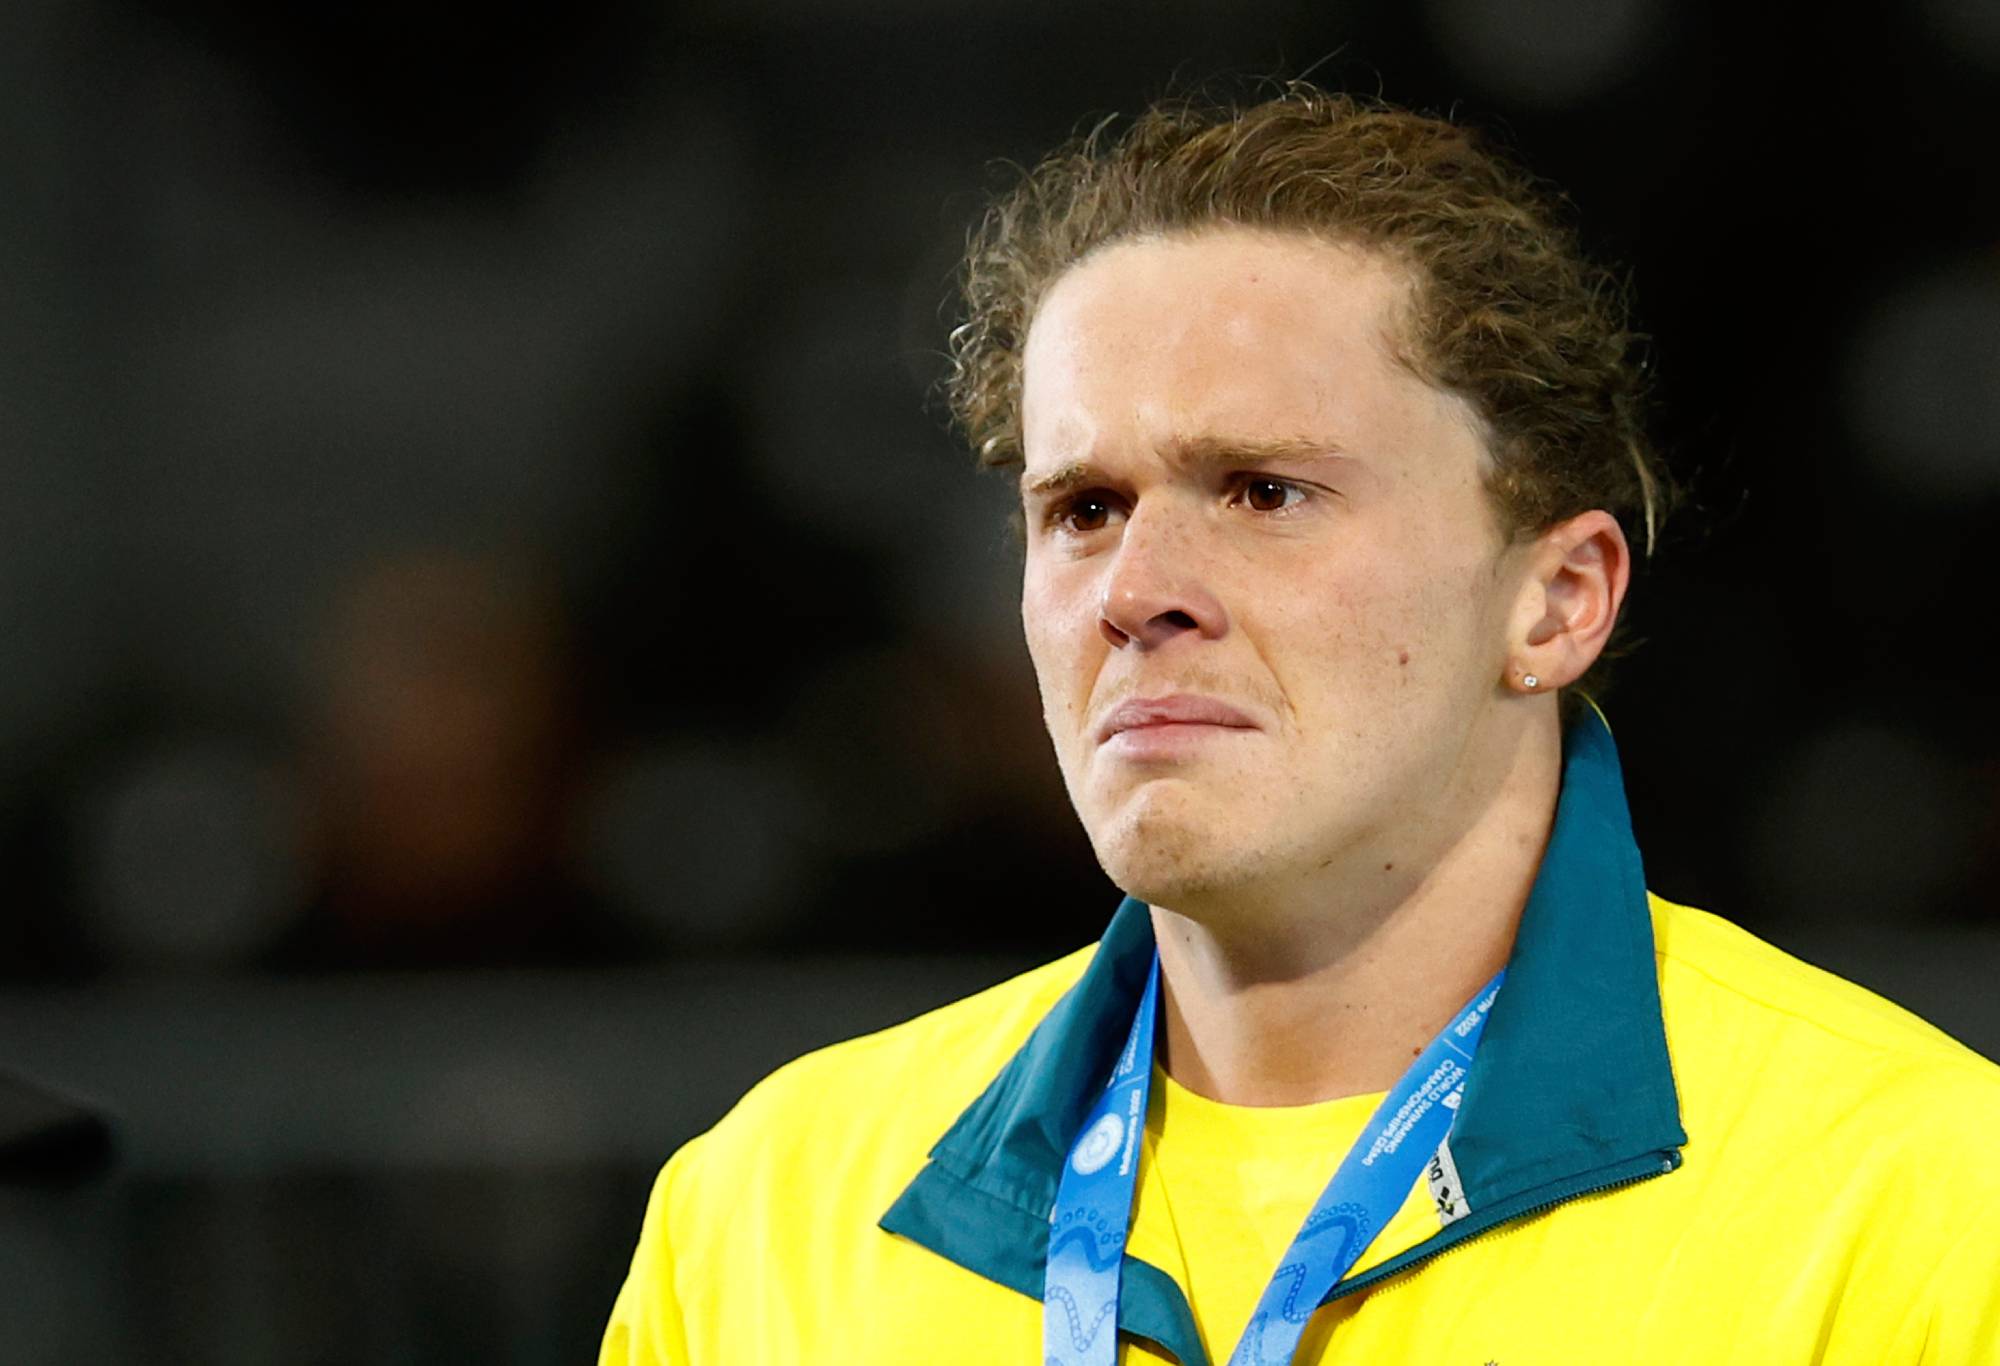 MELBOURNE, AUSTRALIA - DECEMBER 16: Silver medallist Isaac Cooper of Australia shows his emotion during the medal ceremony for the Mens 50m Backstroke Final on day four of the 2022 FINA World Short Course Swimming Championships at Melbourne Sports and Aquatic Centre on December 16, 2022 in Melbourne, Australia. (Photo by Daniel Pockett/Getty Images)